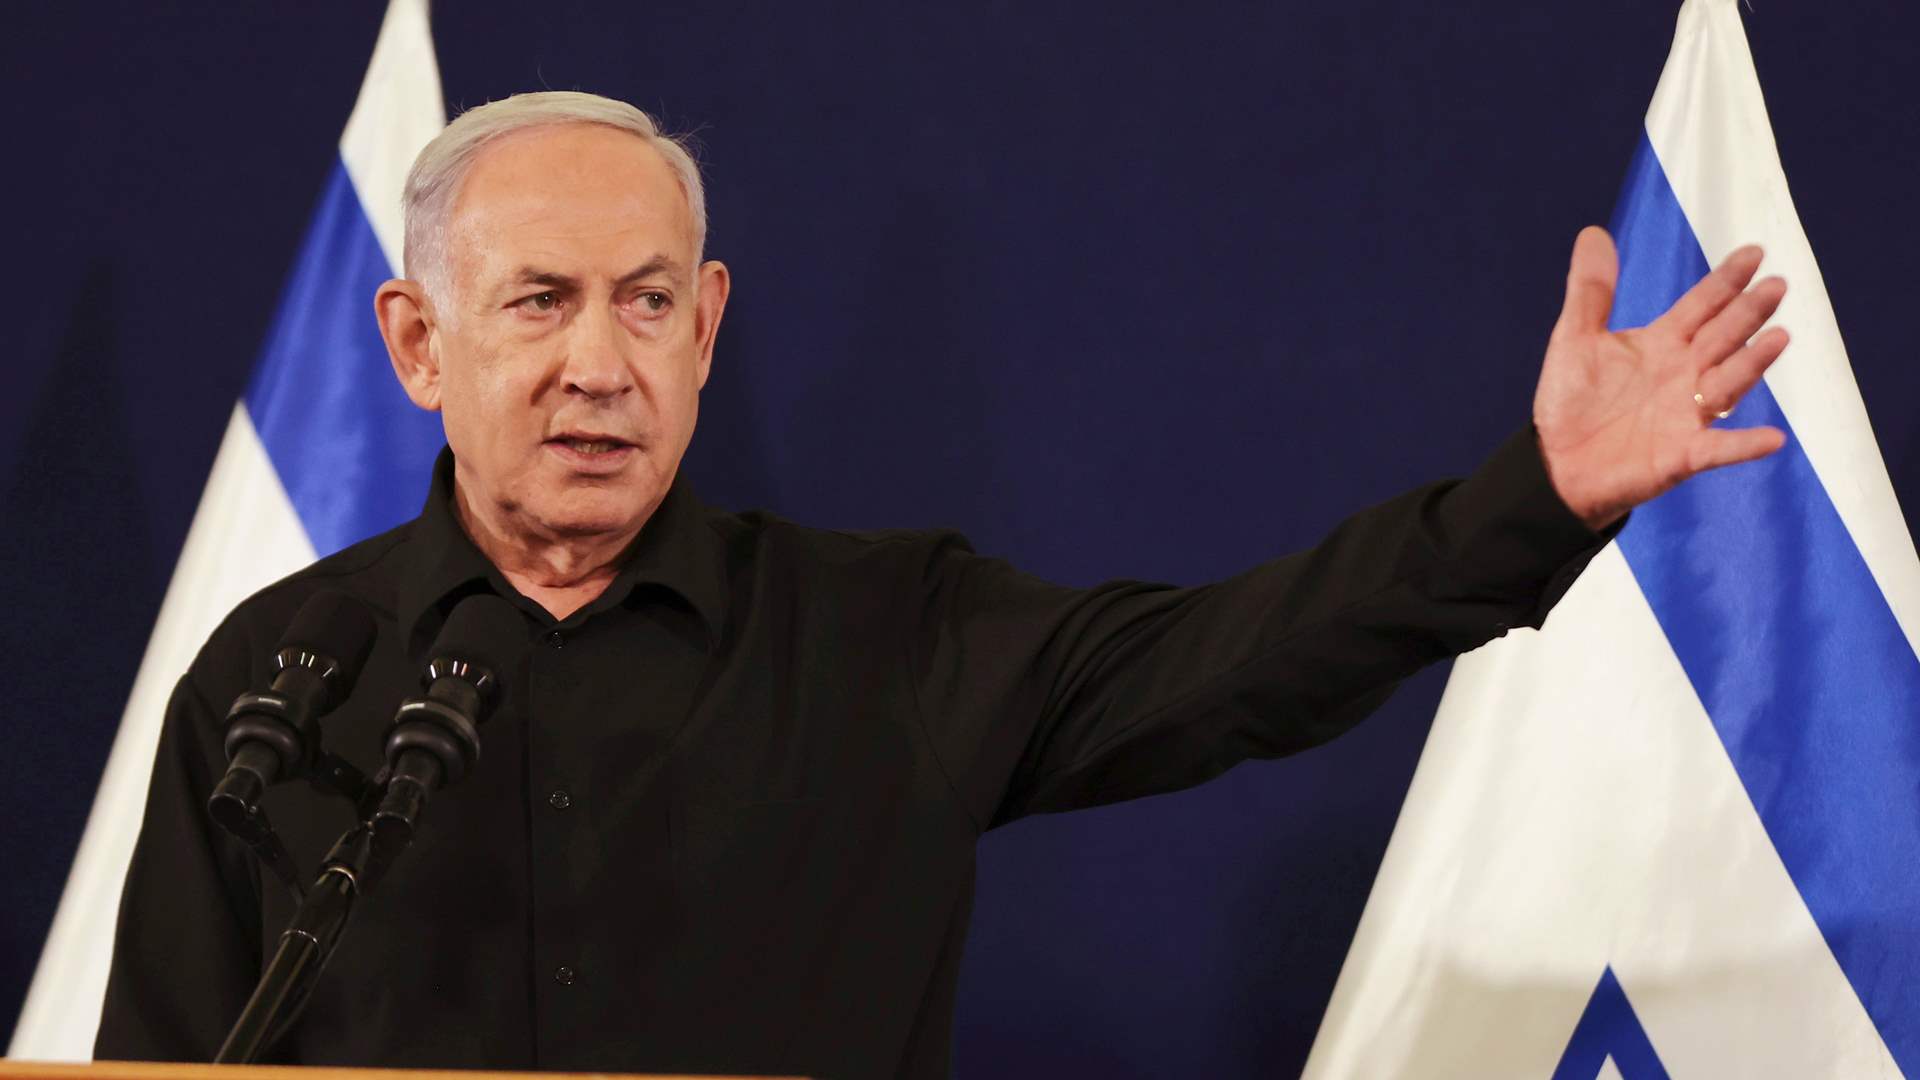 Suicide crisis and political turbulence: Netanyahu&#39;s attempt to refocus attention